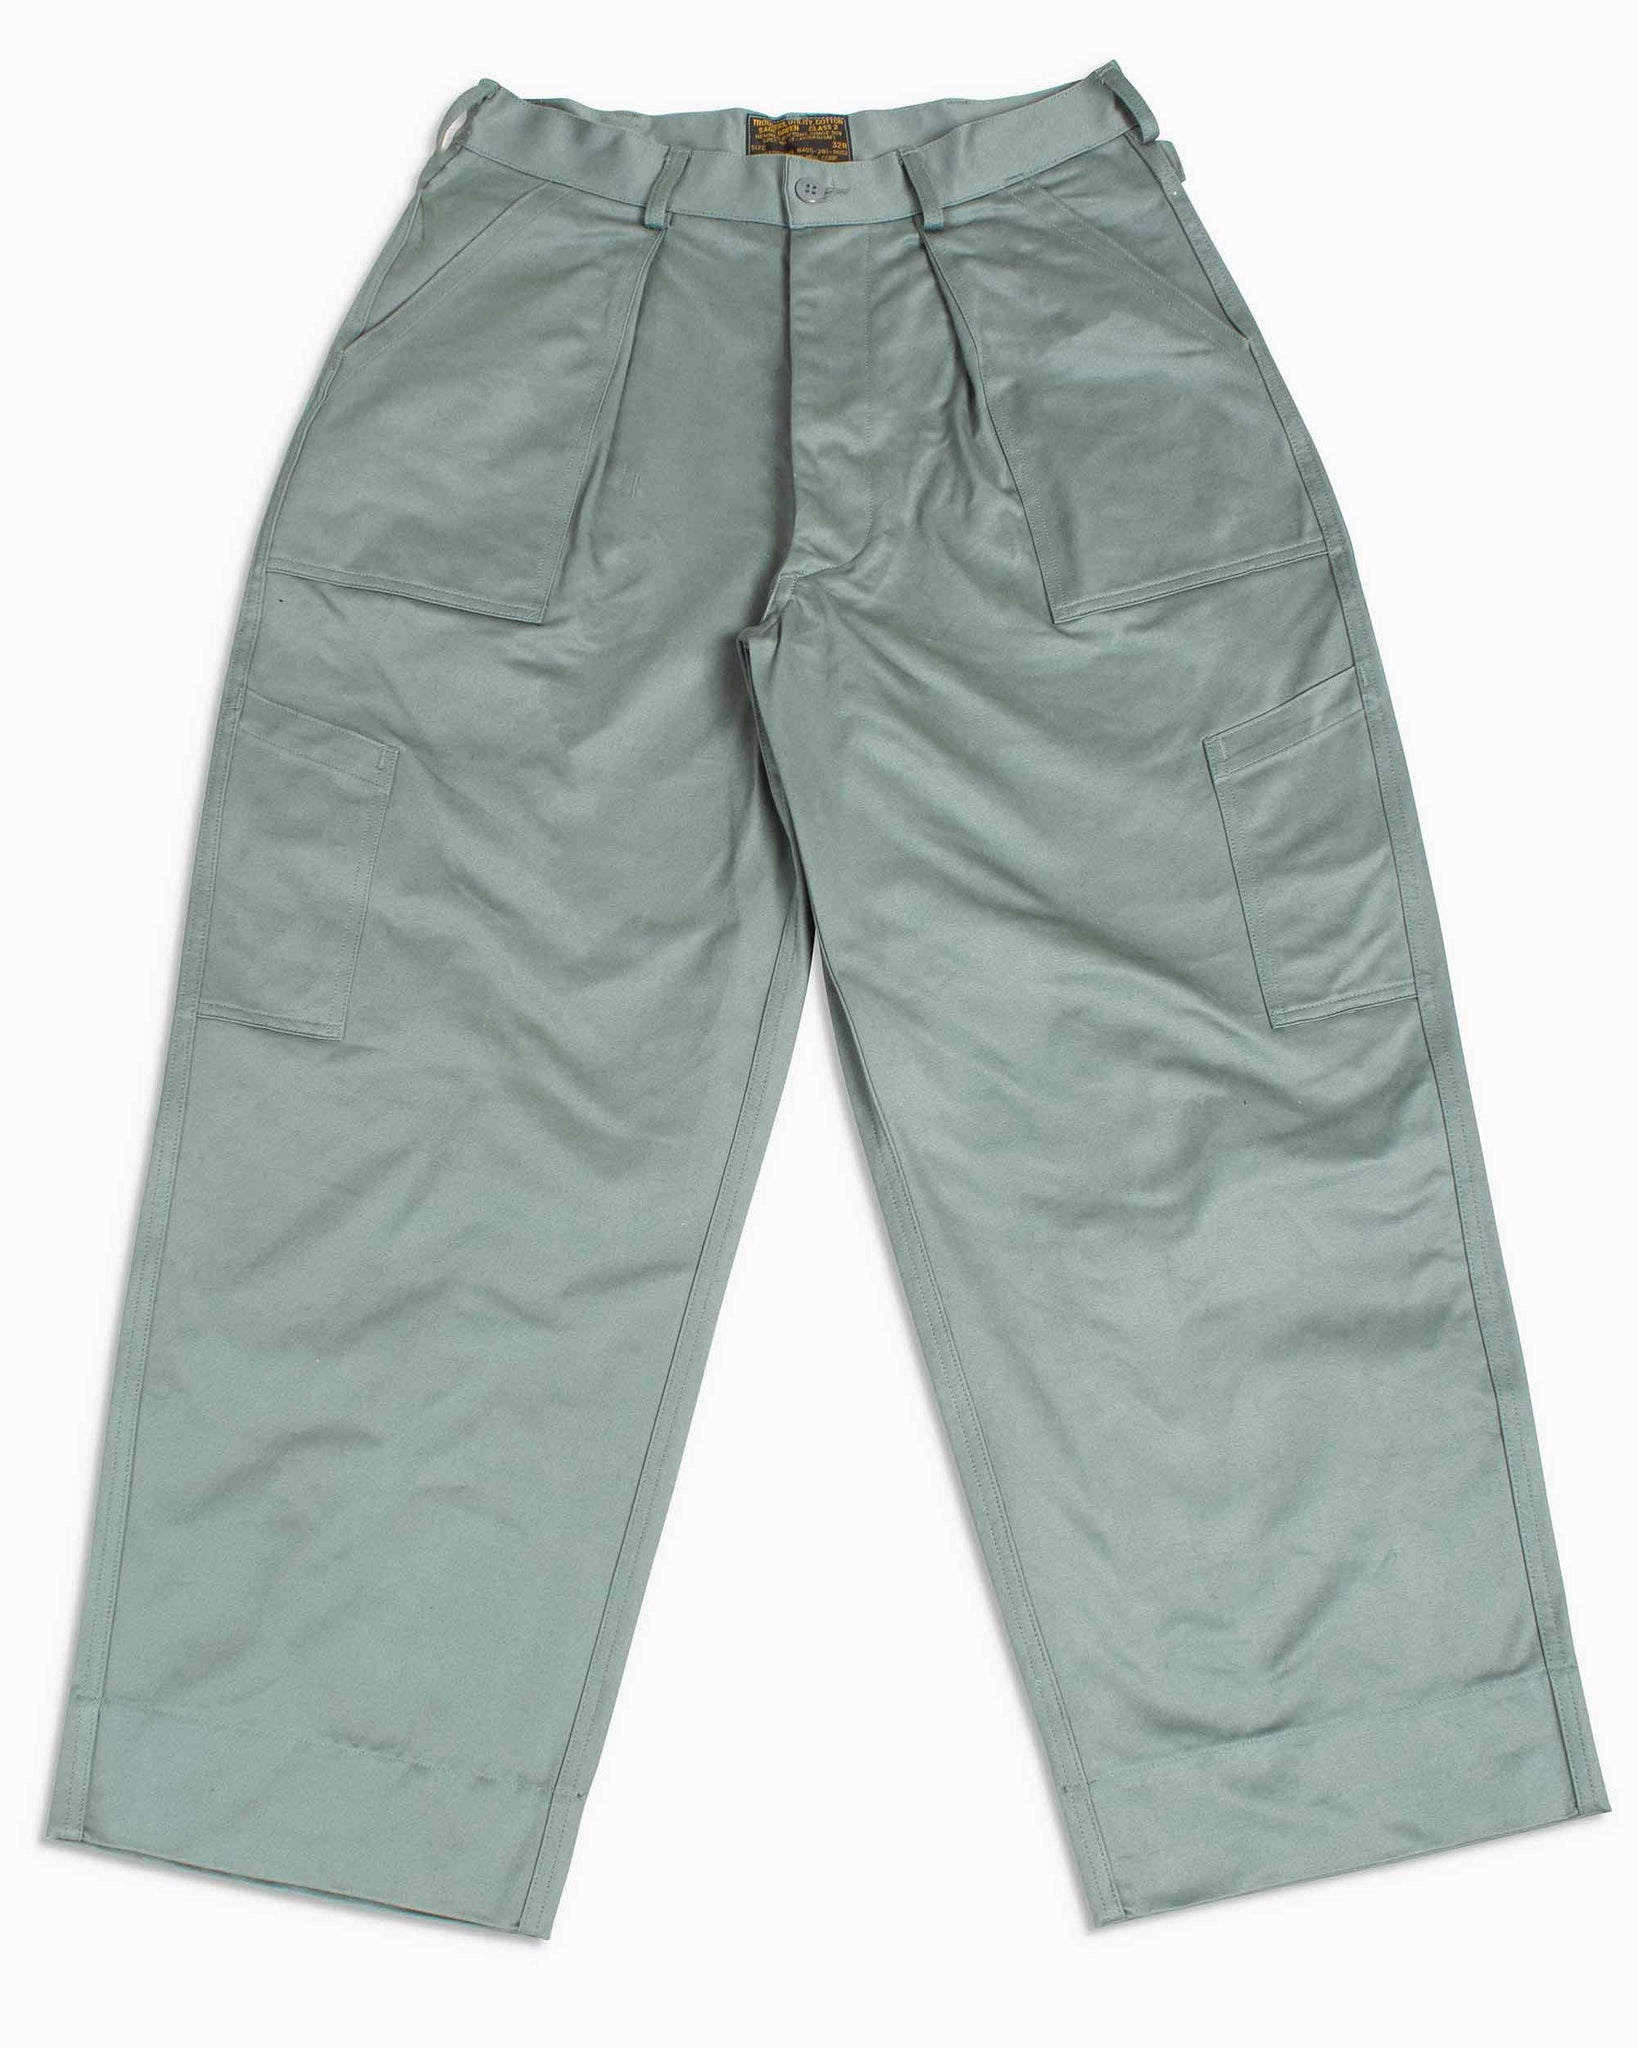 The Real McCoy's MP22103 Trousers, Utility, Cotton / USAF Sage Green